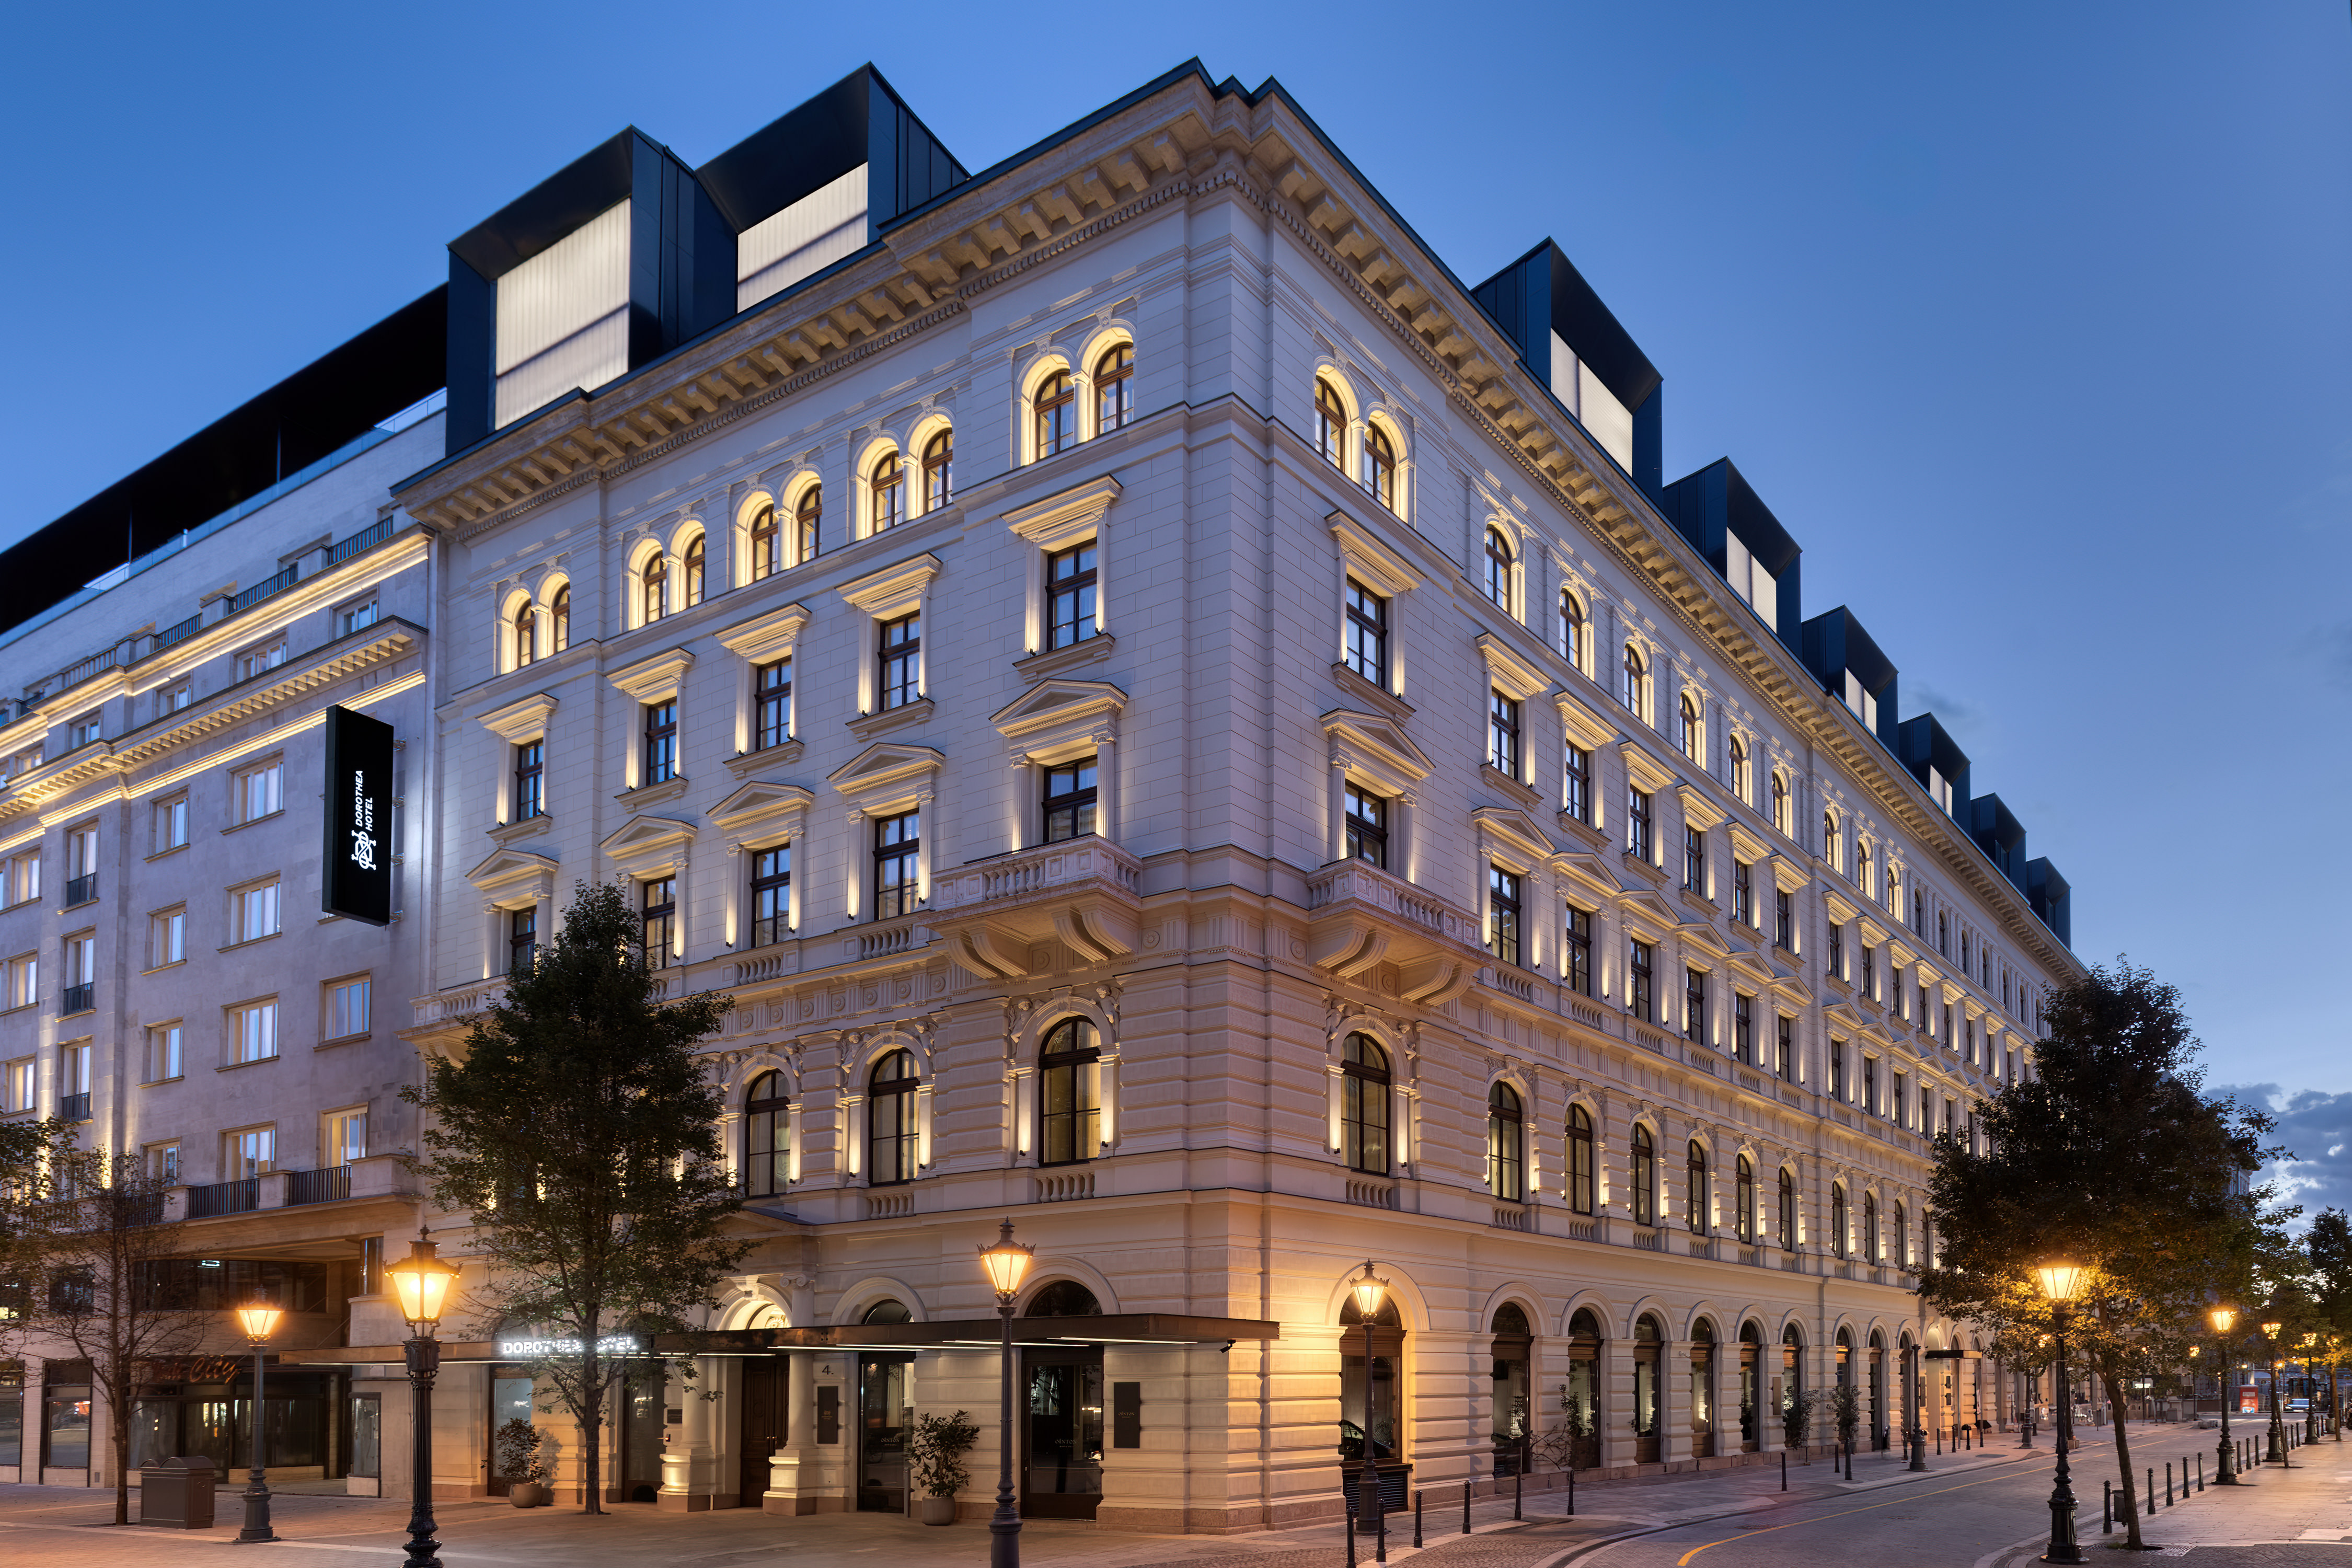 Autograph Collection Debuts in Hungary With Dorothea Hotel